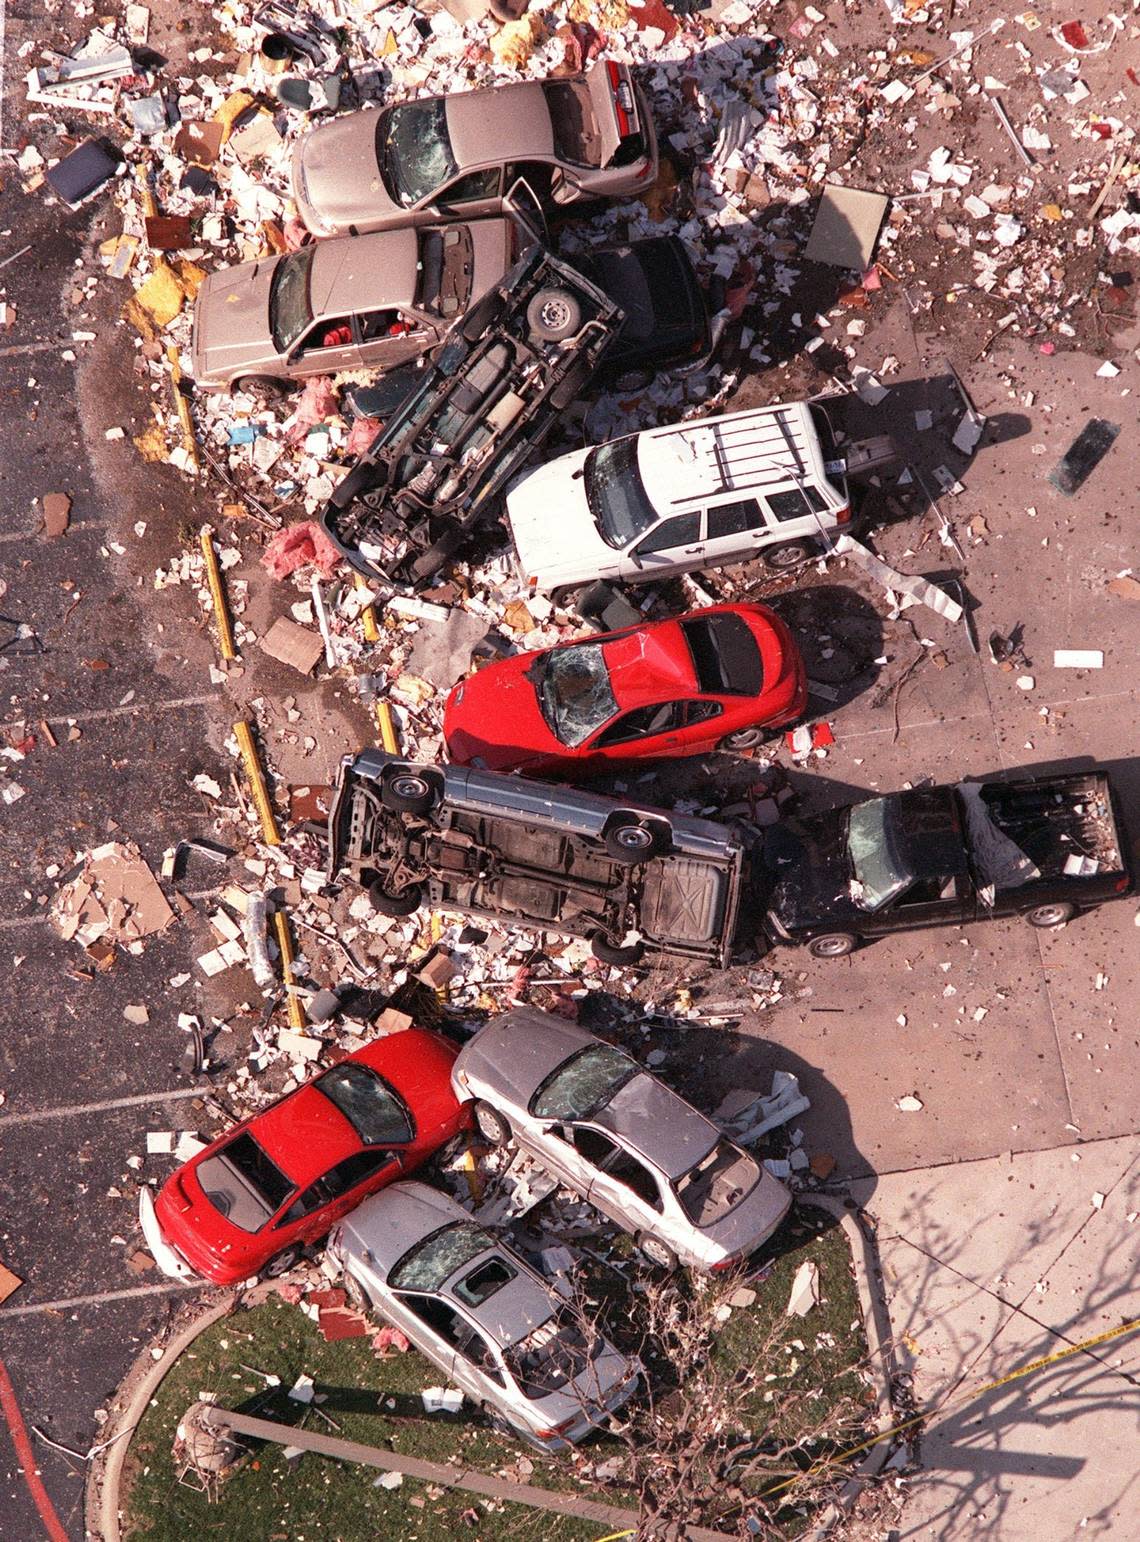 Cars were tumbled in debris outside the Cash America building on West Seventh Street in Fort Worth on the day after the March 28, 2000, tornado.